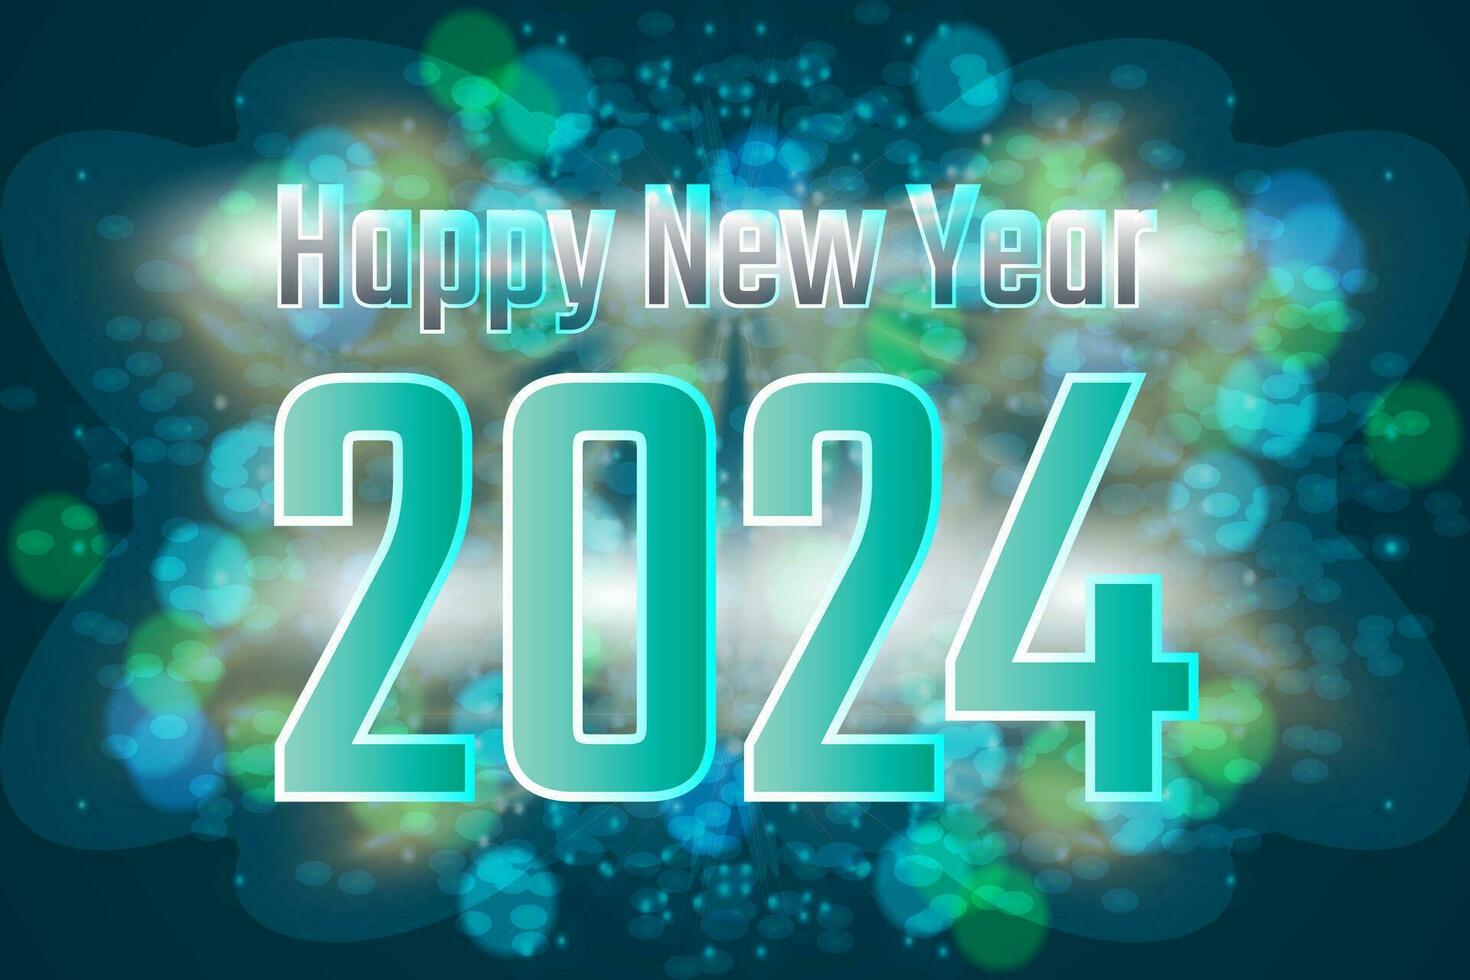 Happy new year background design with christmas light element vector